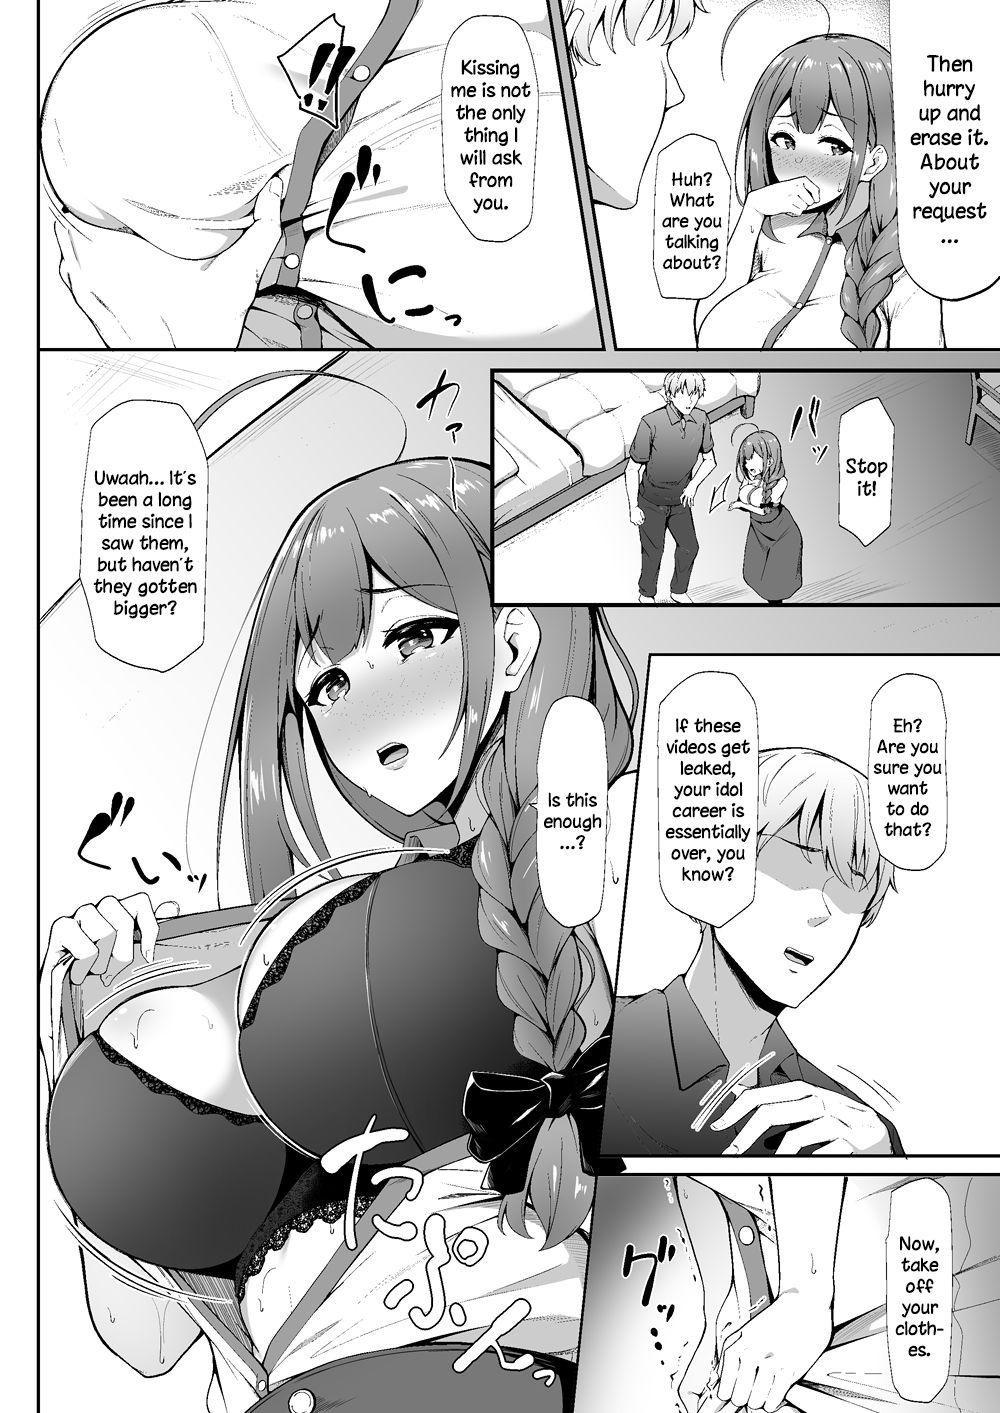 Pink Chiru Out - The idolmaster Hot Whores - Page 7